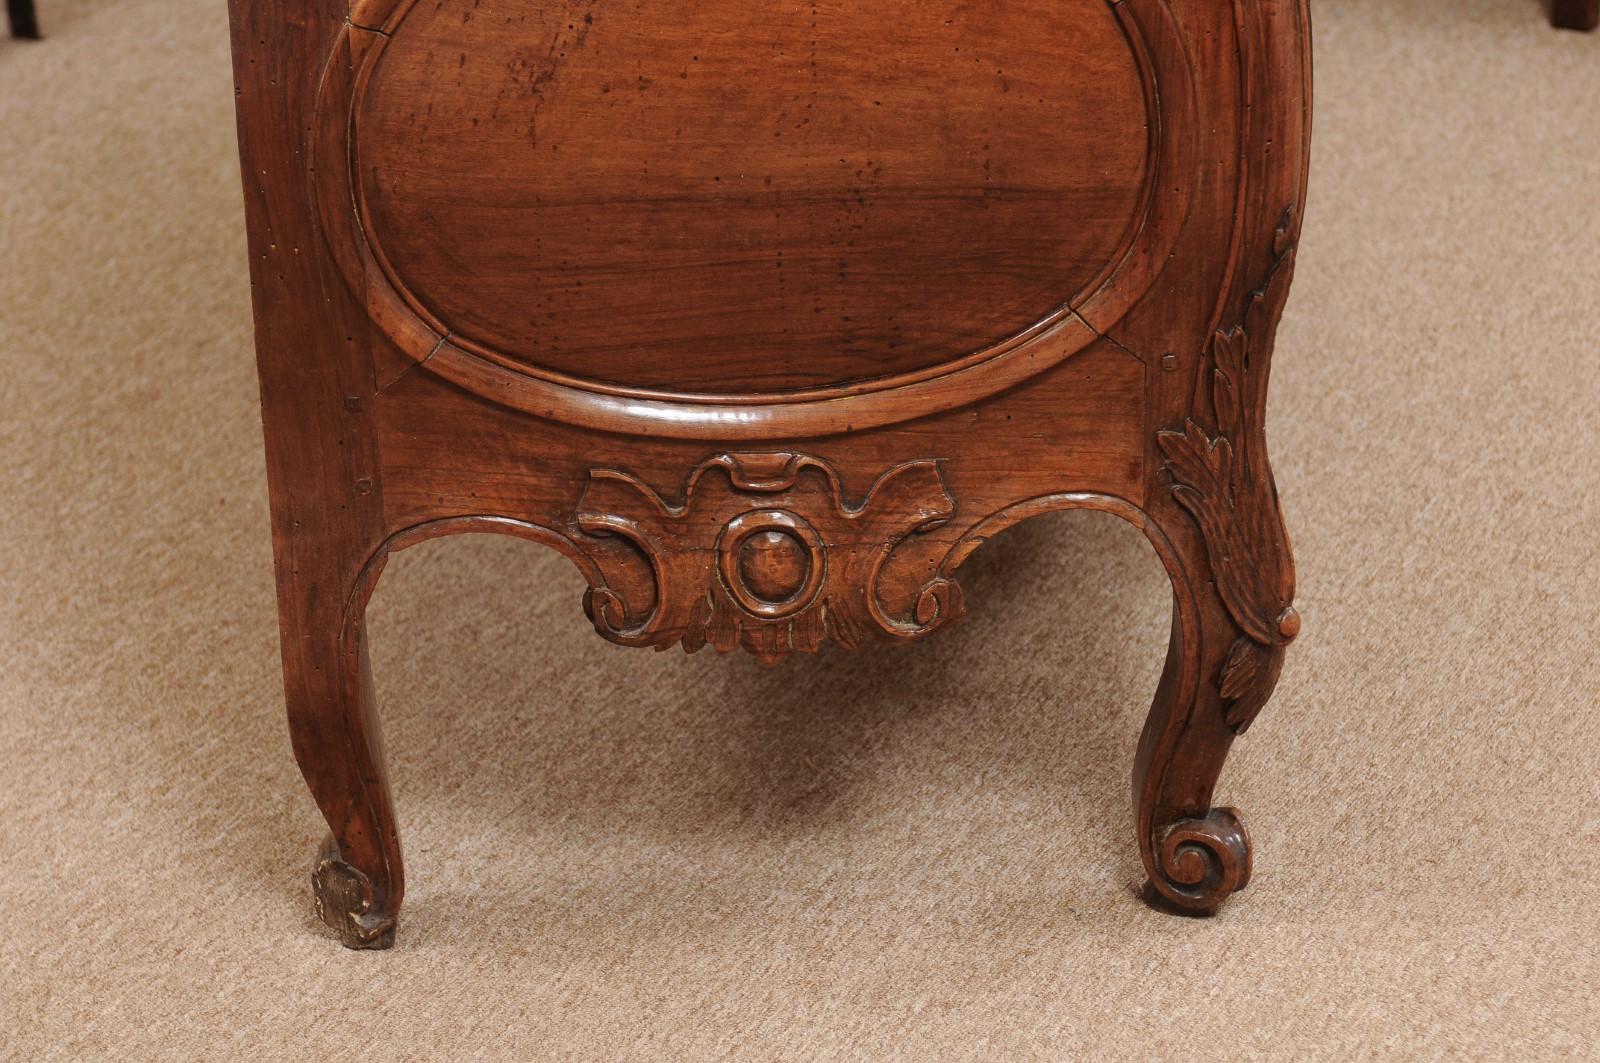 Transitional Louis XV/XVI Walnut Commode with Pierced Apron & Cabriole Legs For Sale 5